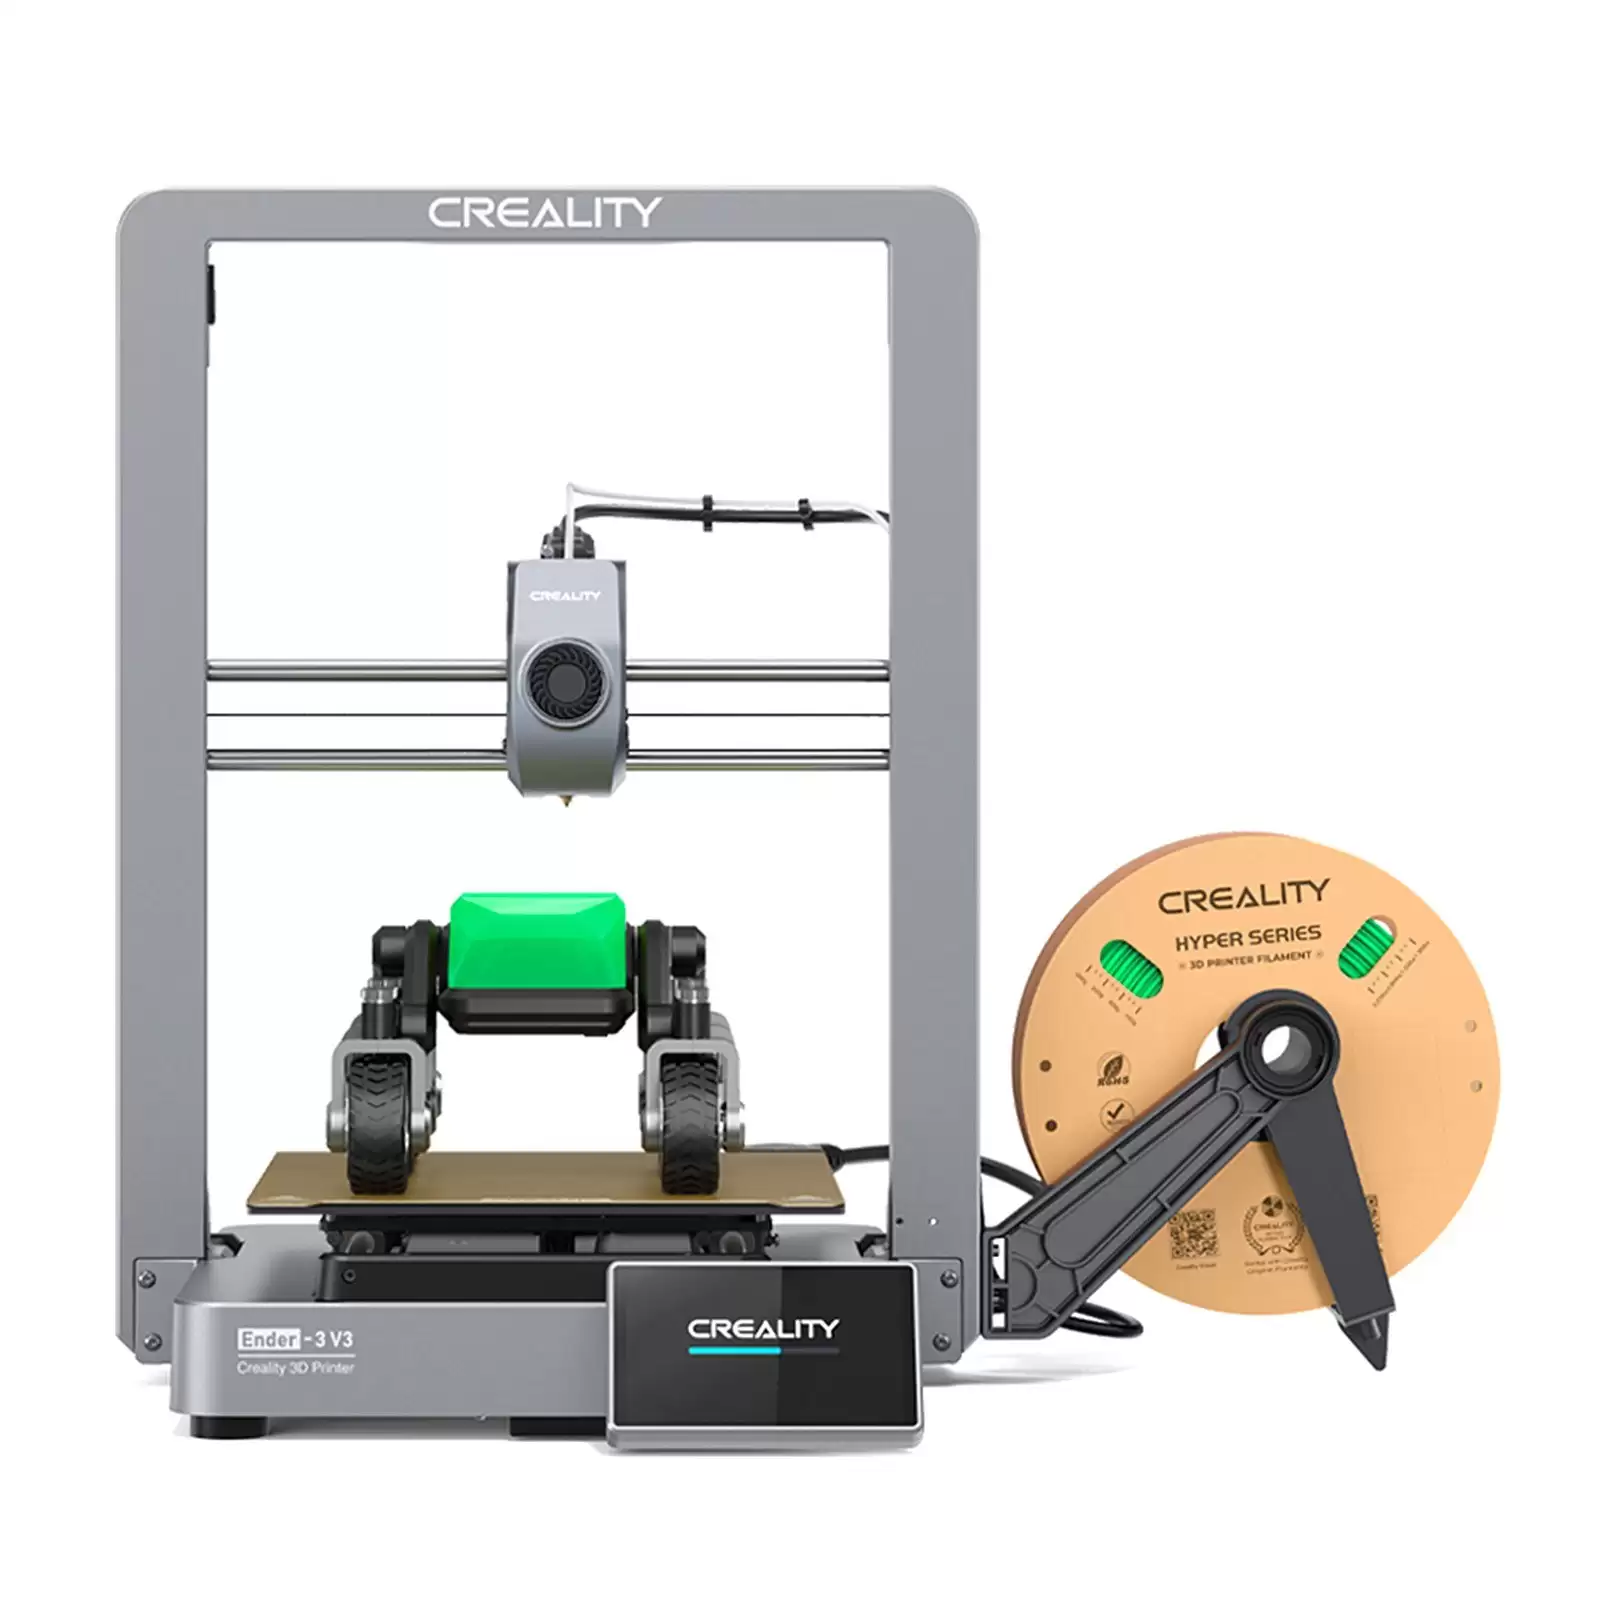 Order In Just $295 Creality Ender-3 V3 3d Printer Auto-Leveling 600mm/S Max Printing Speed, 295? At Tomtop